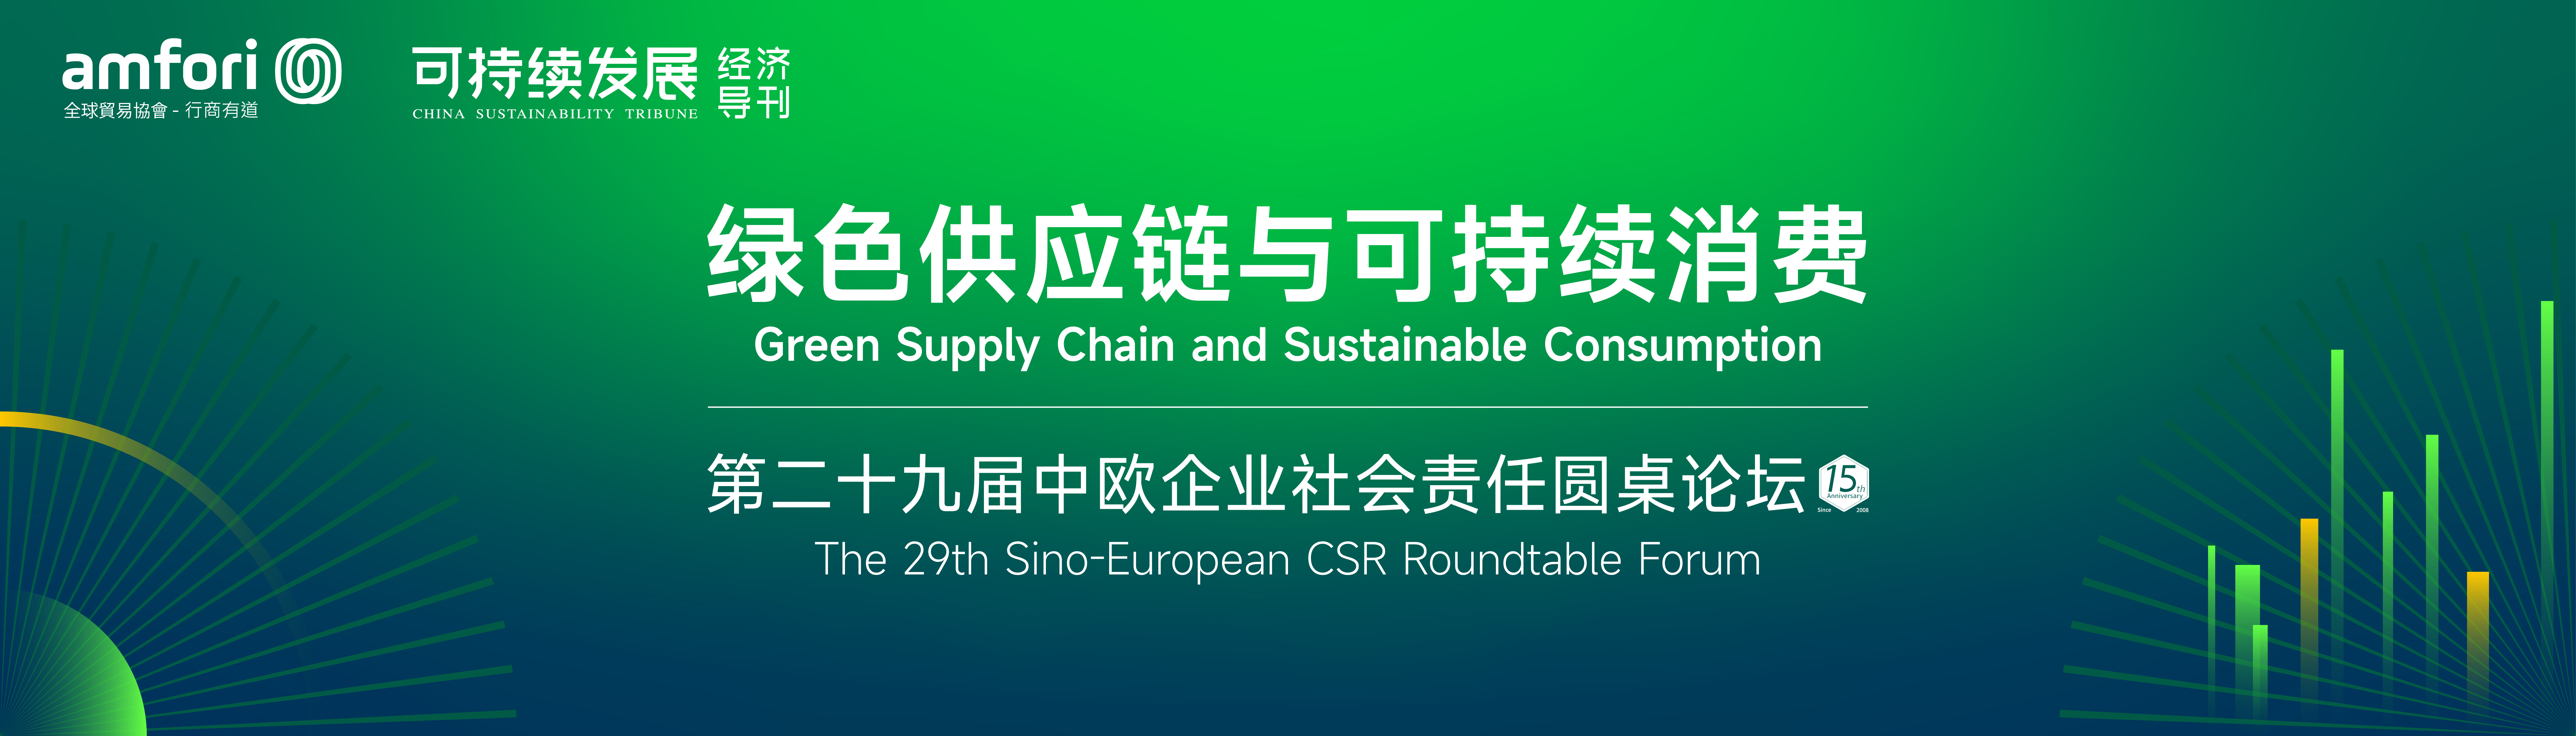 Unlock a future of sustainable consumption with green supply chains